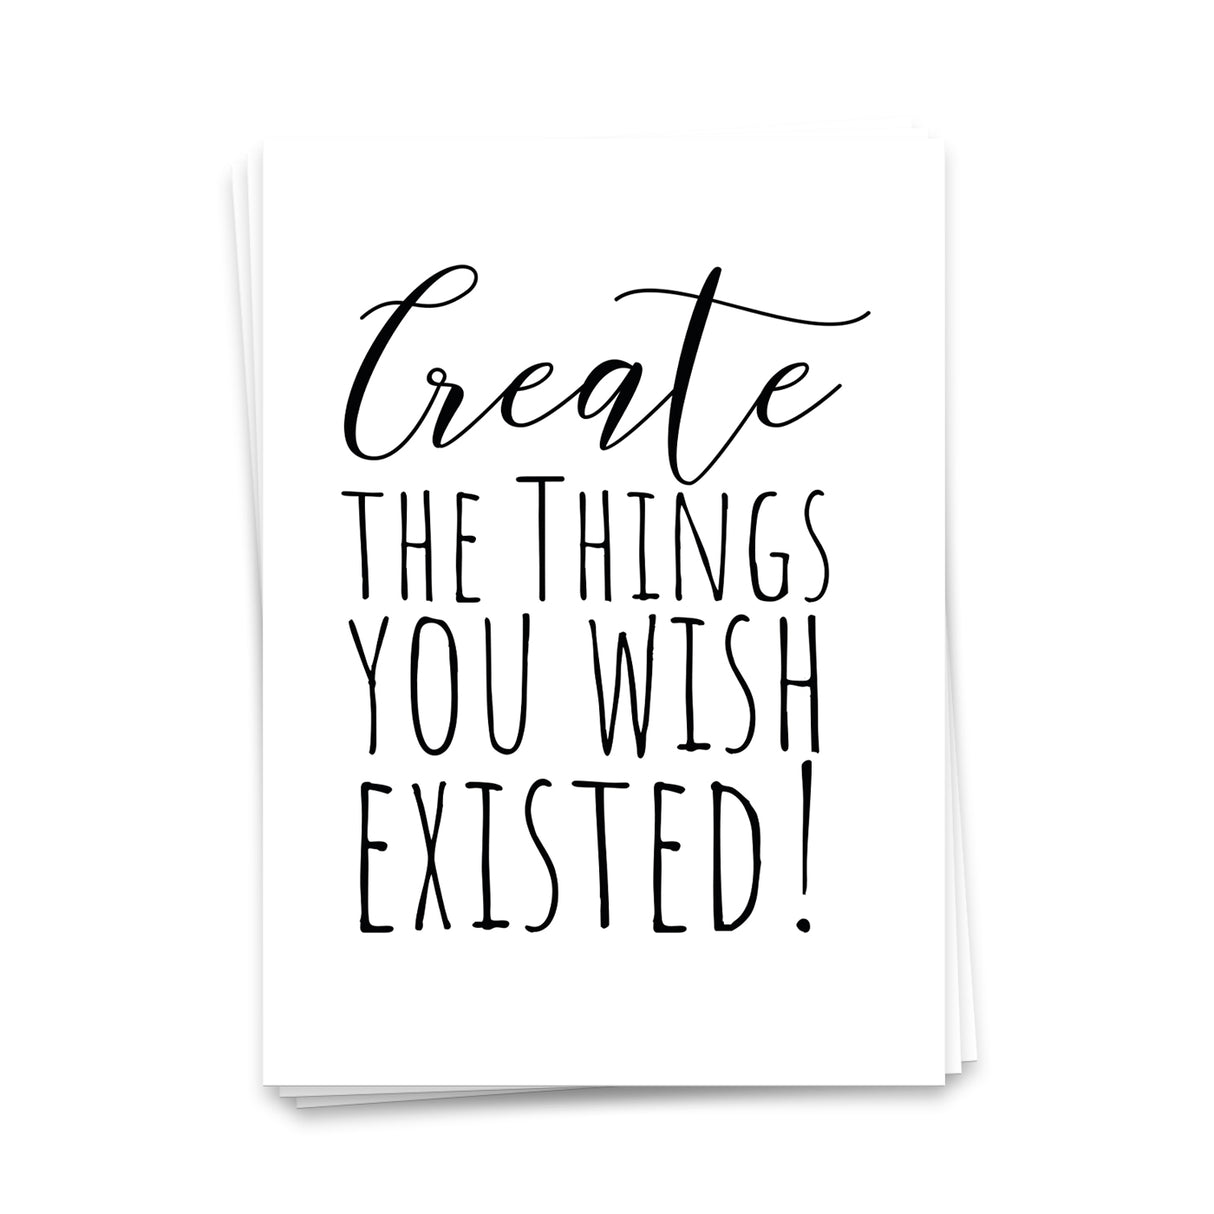 Create the things you wish existed